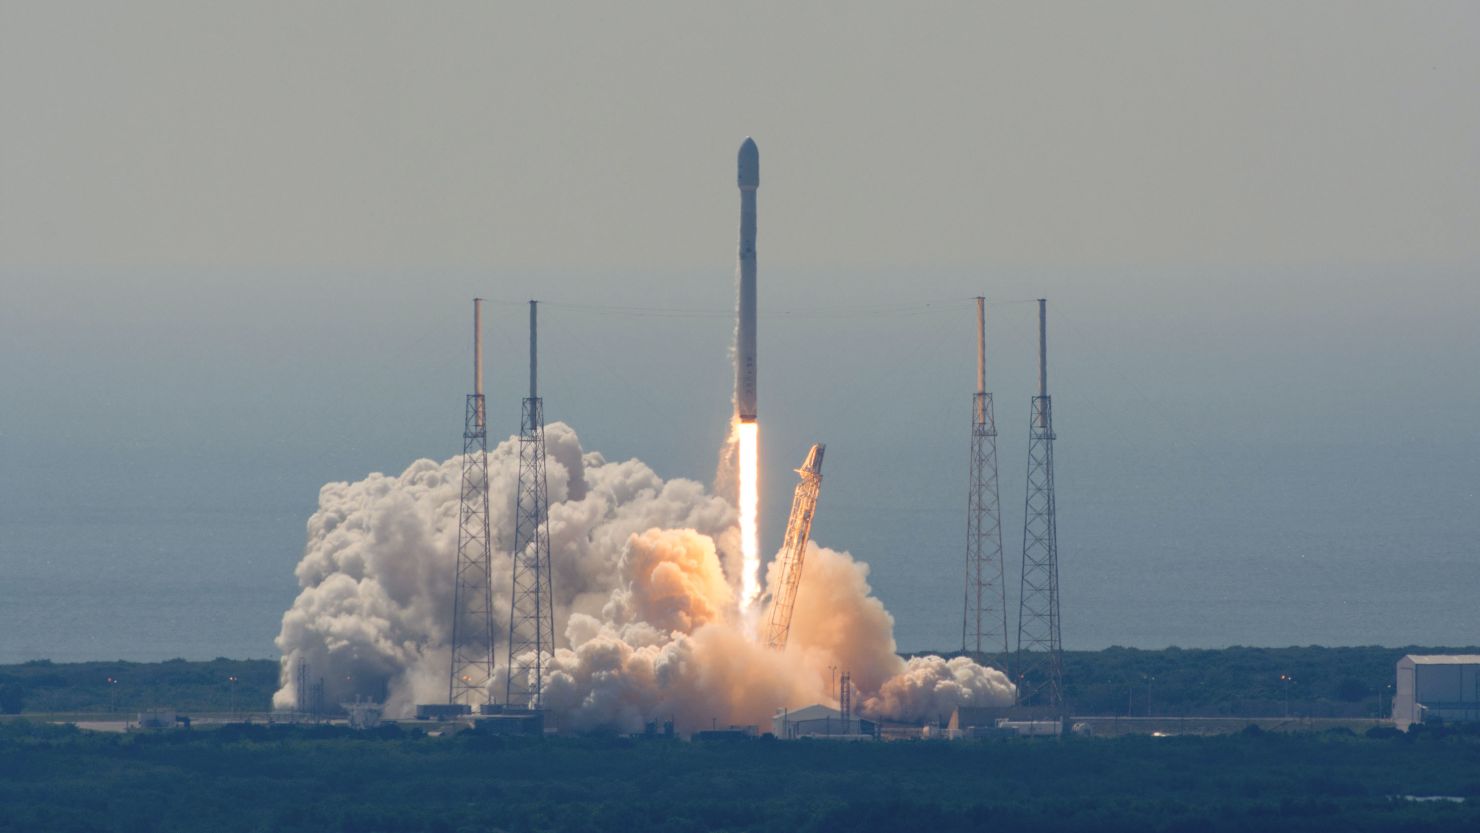 SpaceX launched two satellites into Earth's orbit Wednesday. This photo is from a rocket launch in April 2016.